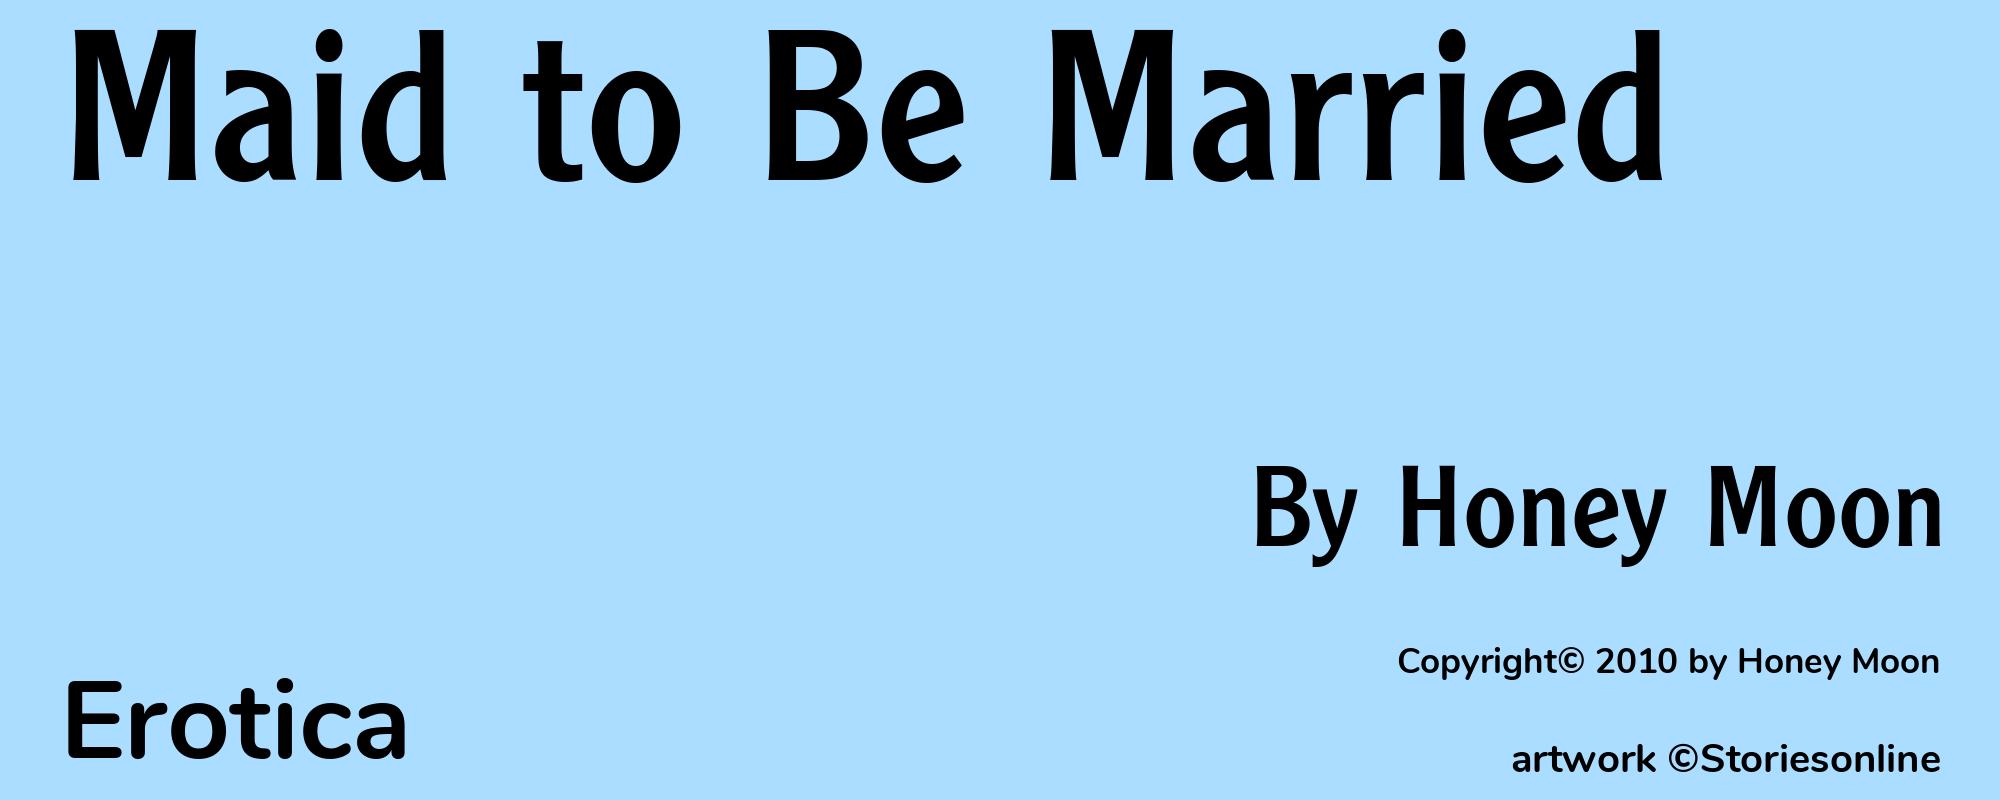 Maid to Be Married - Cover